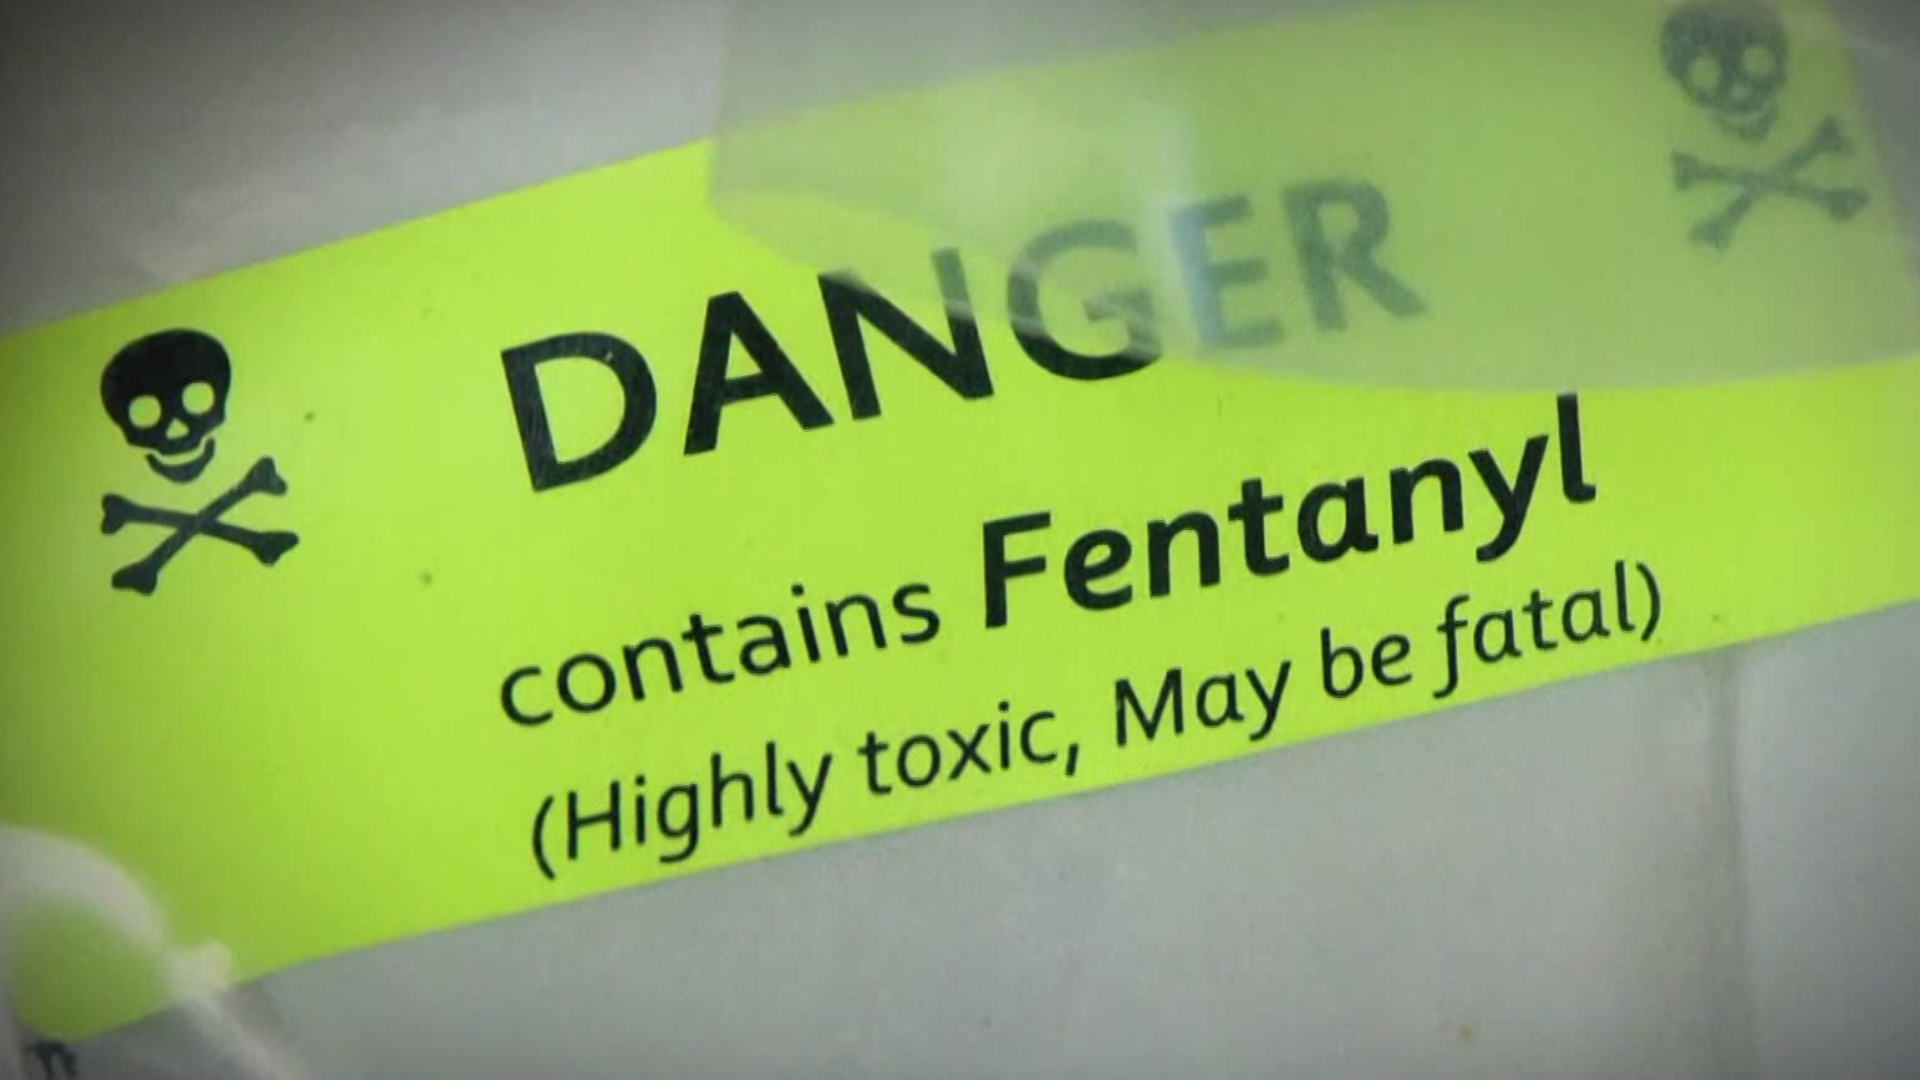 Fentanyl is much more potent than heroin, and often, people don't know they are even taking it.